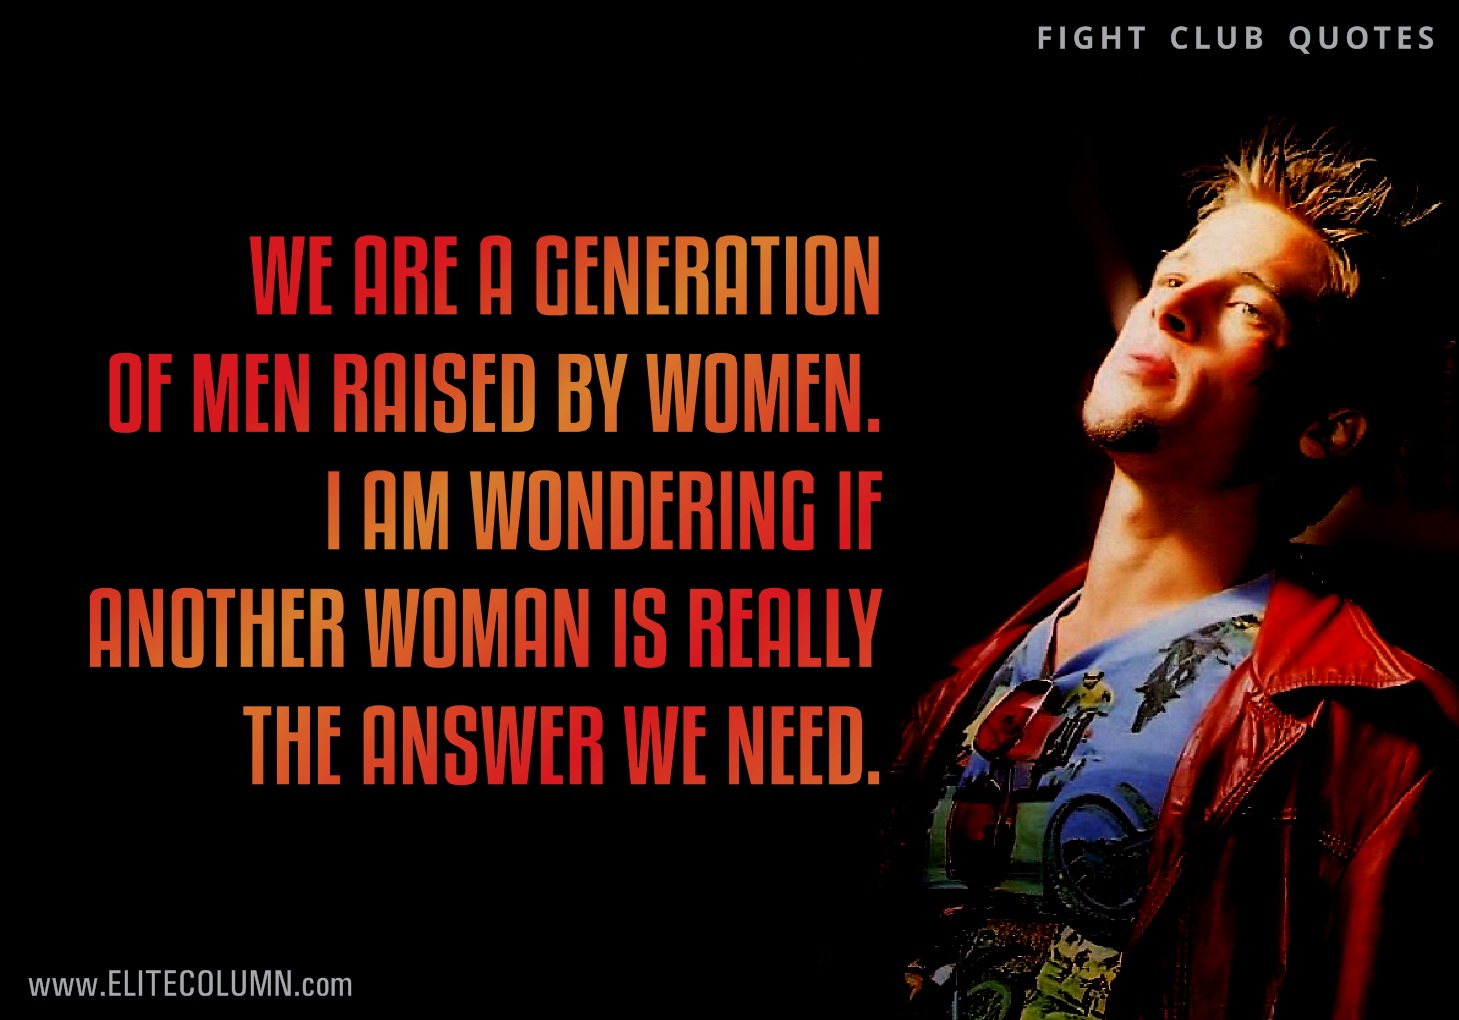 12 Best Fight Club Quotes To Give It Back To Your Enemies | EliteColumn